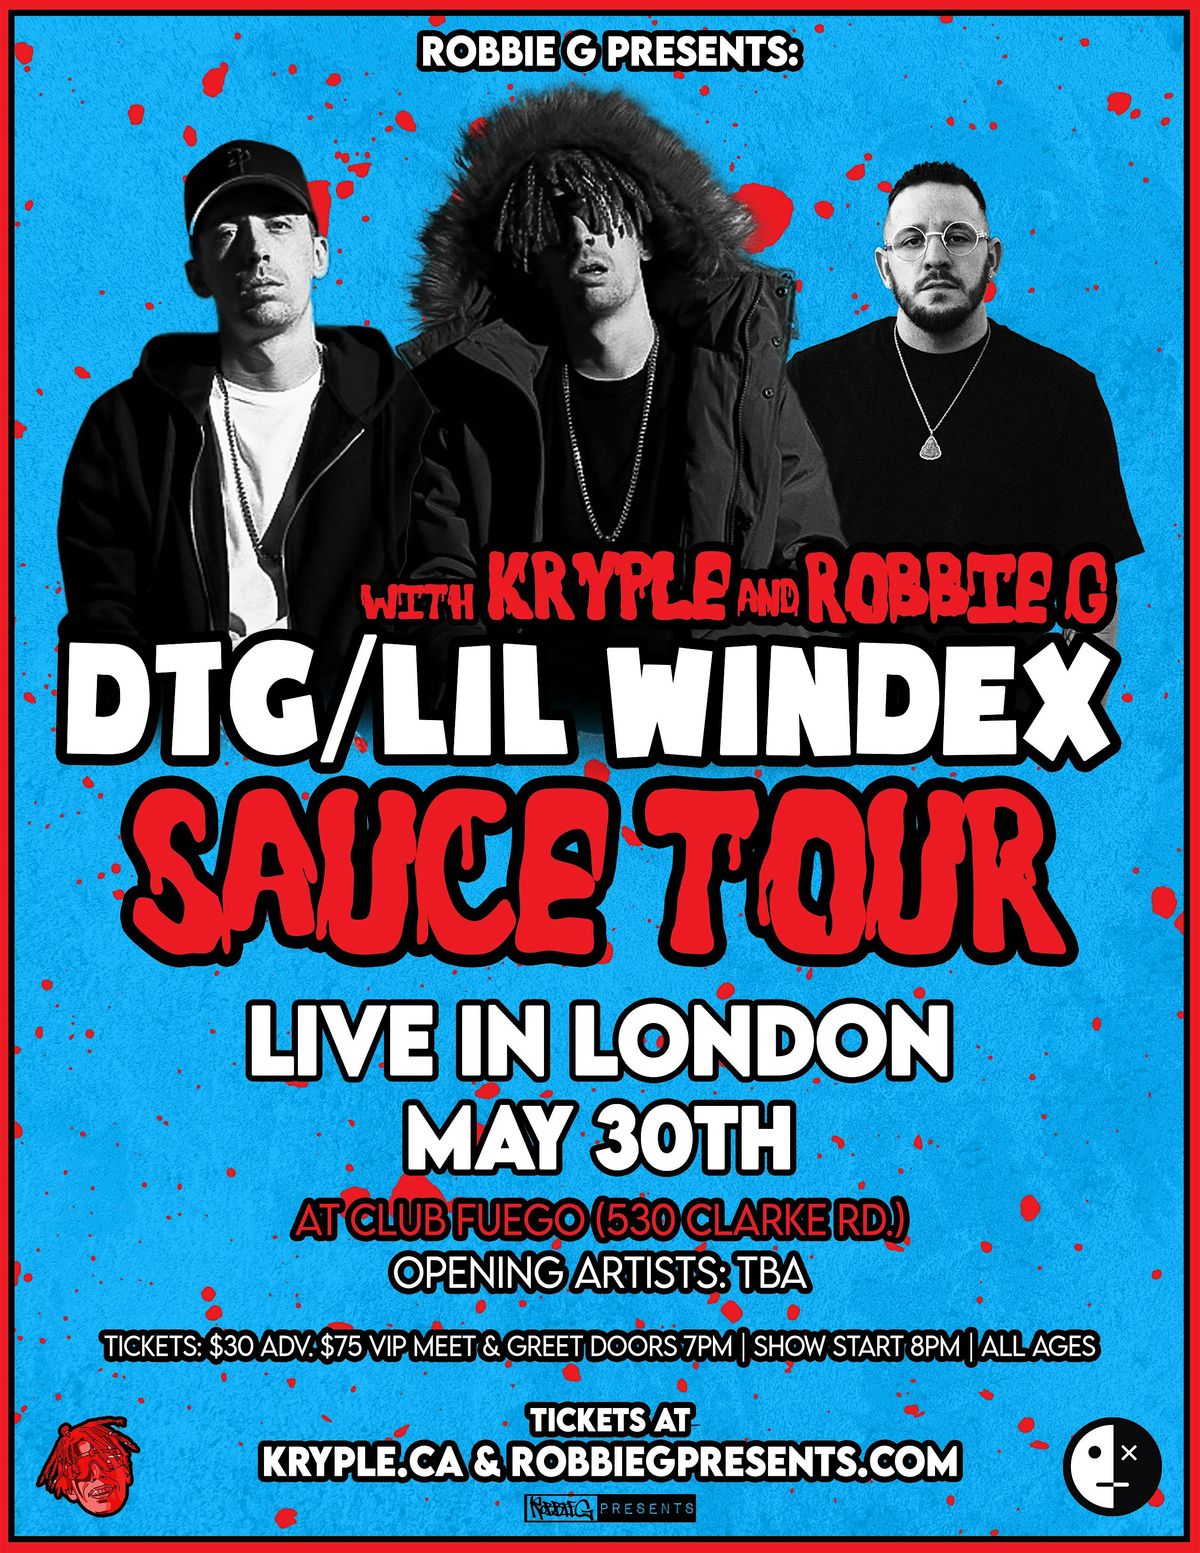 DTG\/Lil Windex Live in London May 30th at Club Fuego with Kryple & Robbie G